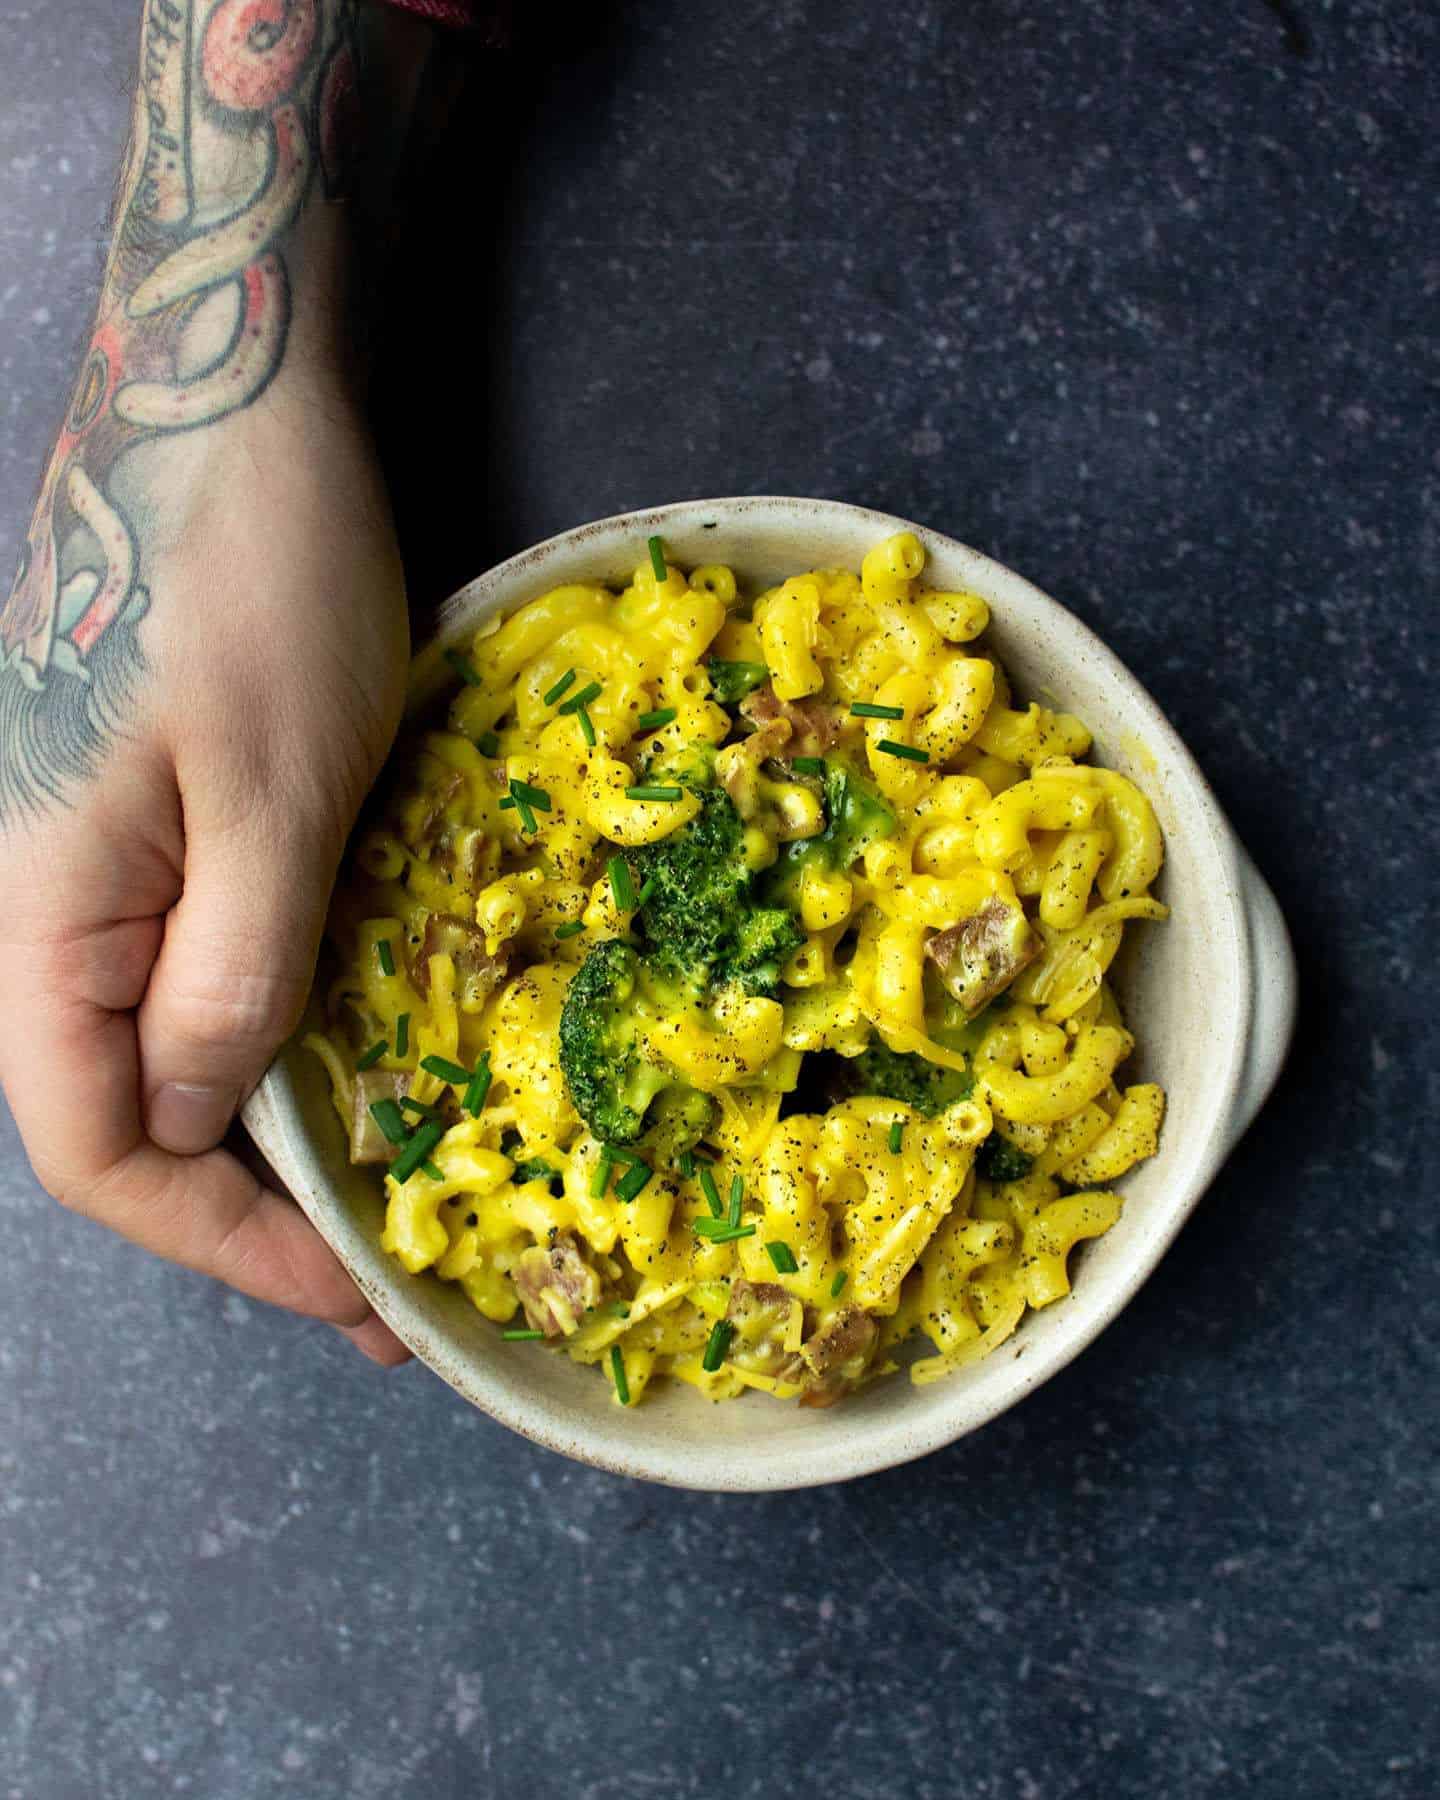 A hand holding a bowl of baked vegan mac and cheese with broccoli and vegan bacon